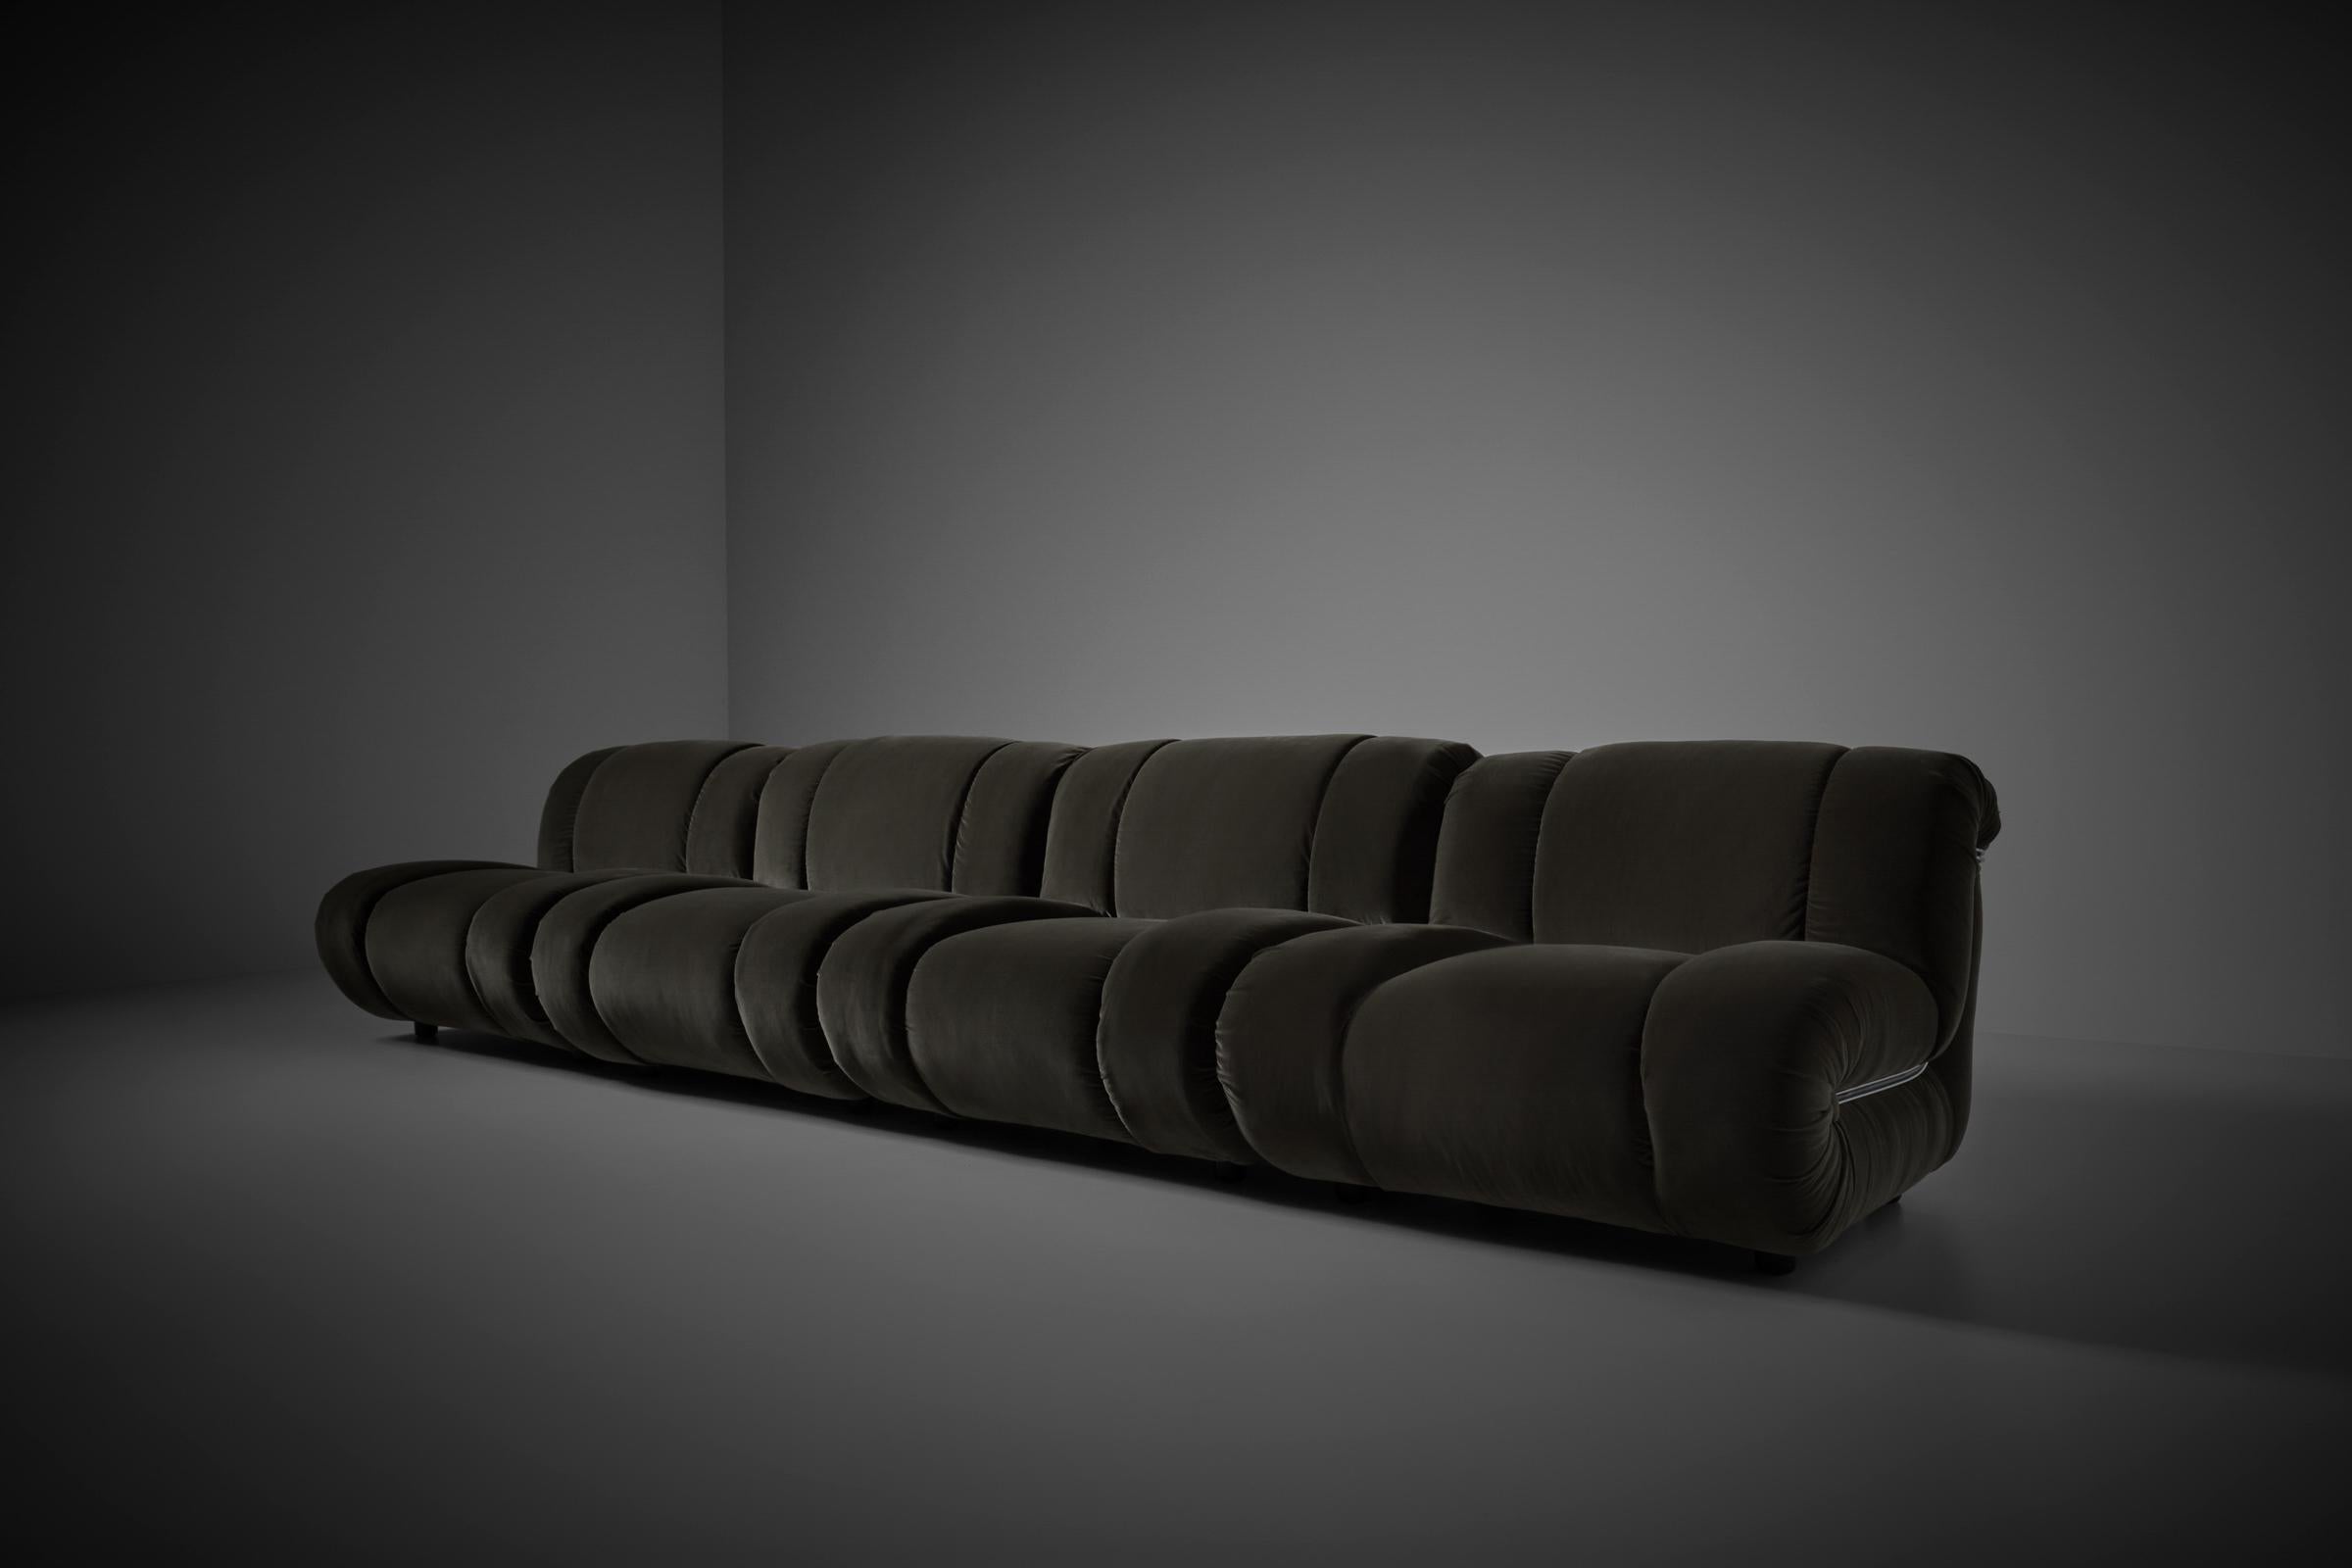 Modular sofa 'Velasquez' by Mimo Padova, Italy 1970s. Very comfortable sofa consisting out of four bulky shaped modular elements molded together by chromed metal clamps. The sofa is reupholstered in a grayish green colored velvet fabric by Dedar ®,